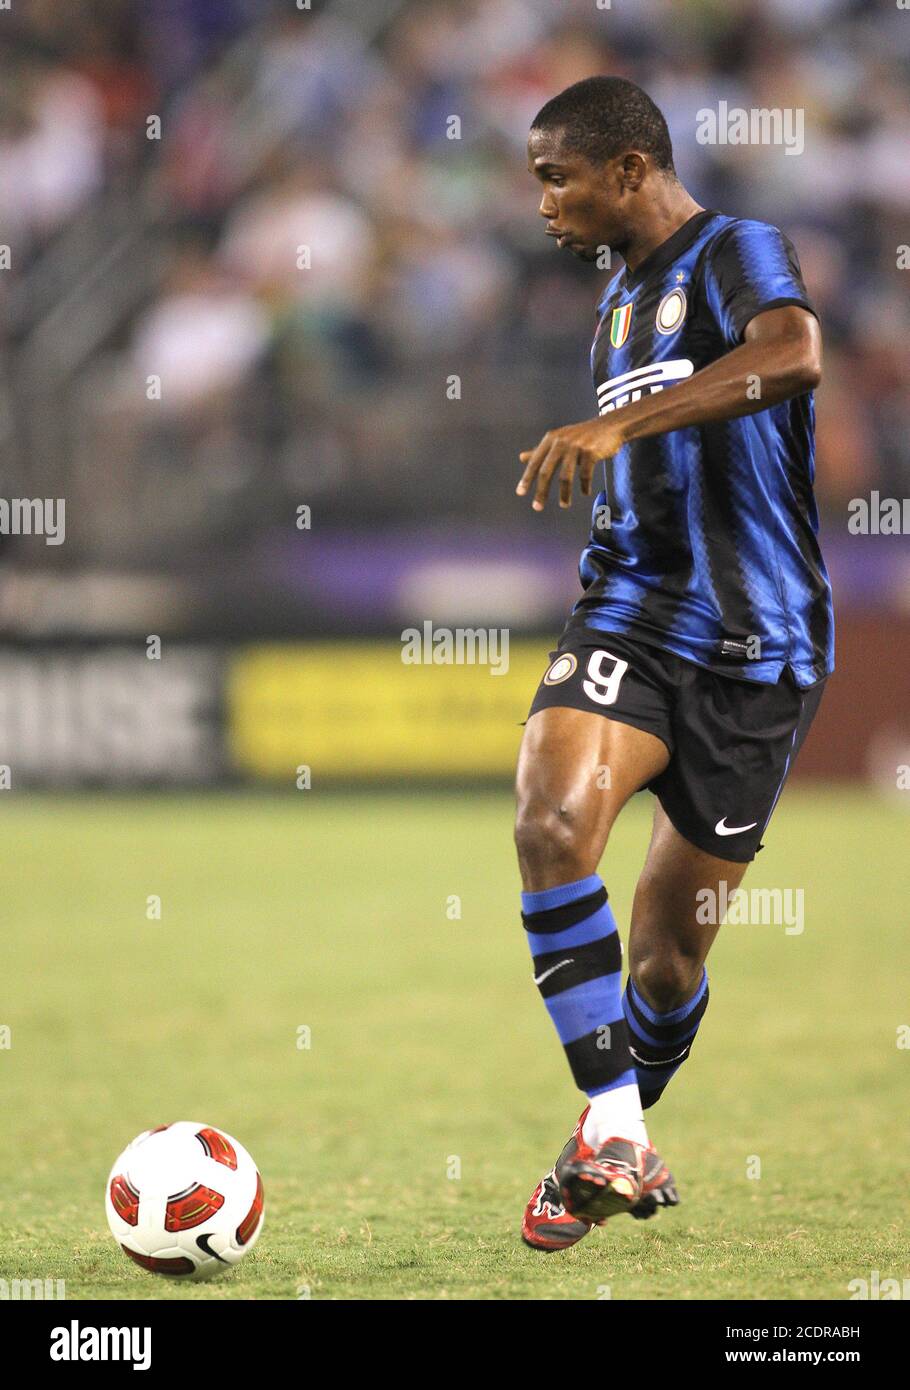 Samuel Eto'o #9 of Inter Milan during an international friendly match against Manchester City on July 31 2010 at M&T Bank Stadium in Baltimore, Maryla Stock Photo